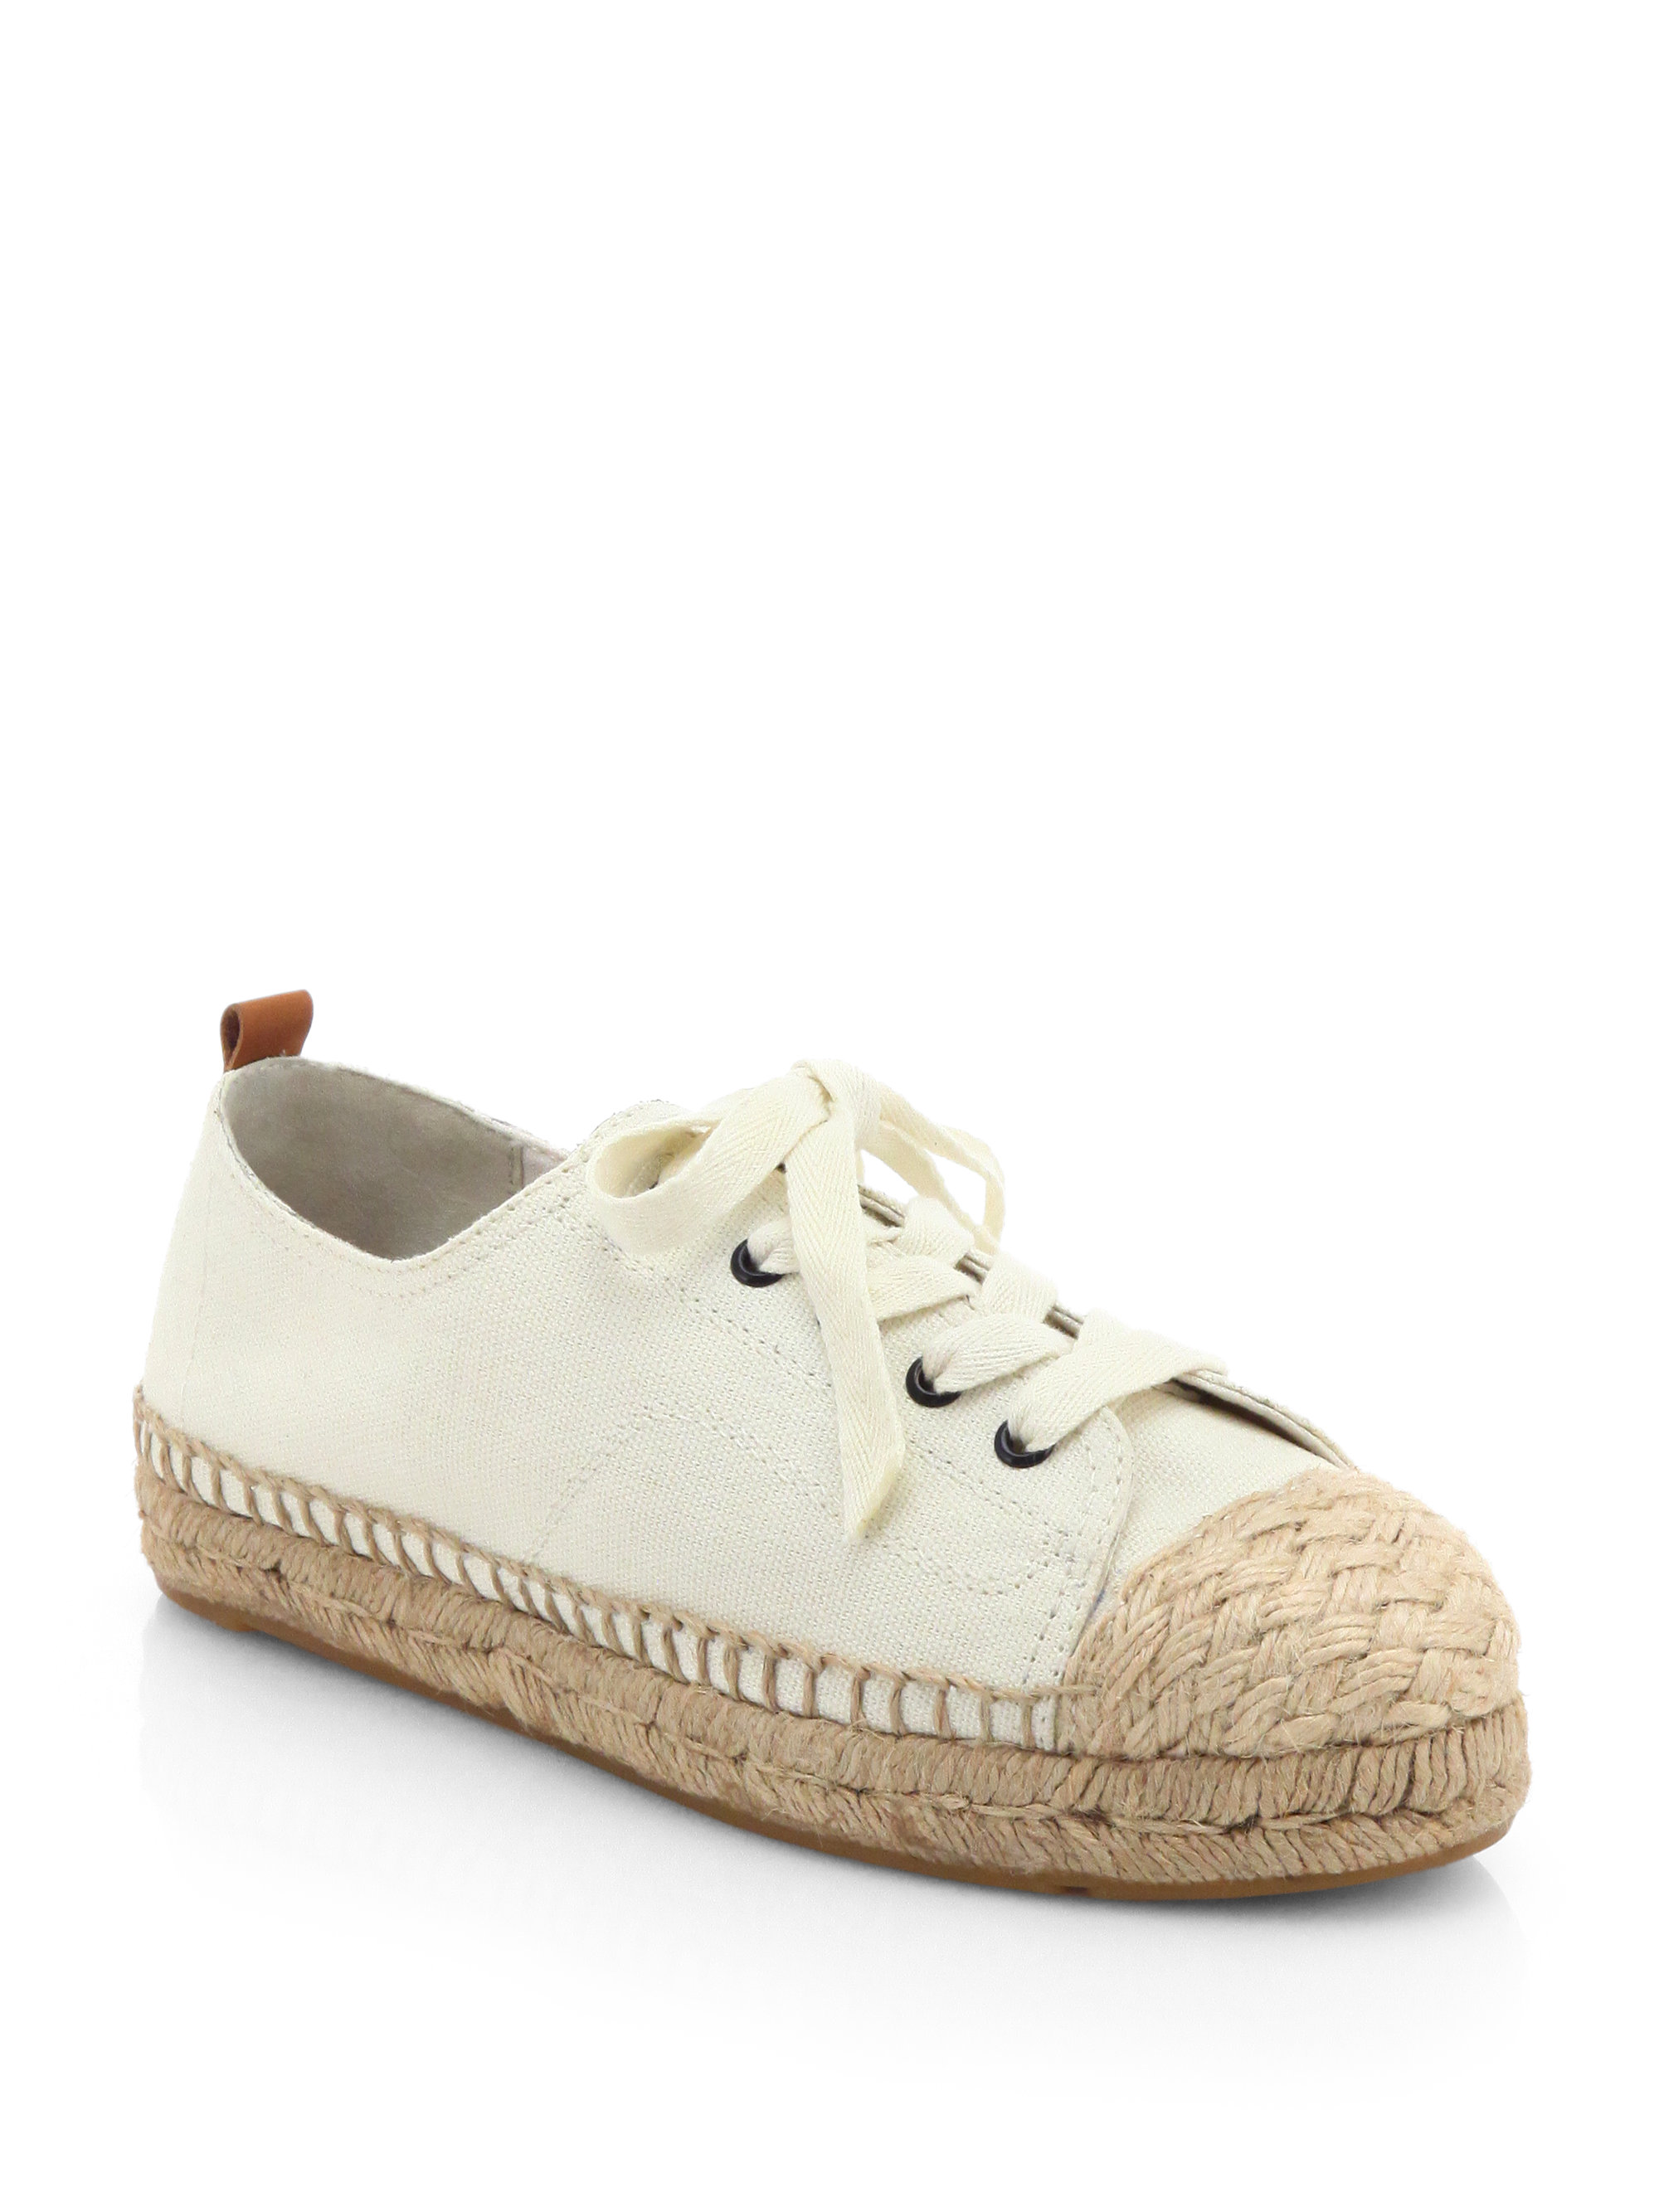 Lyst - Tory Burch Carter Canvas Laceup Espadrille Sneakers in Natural